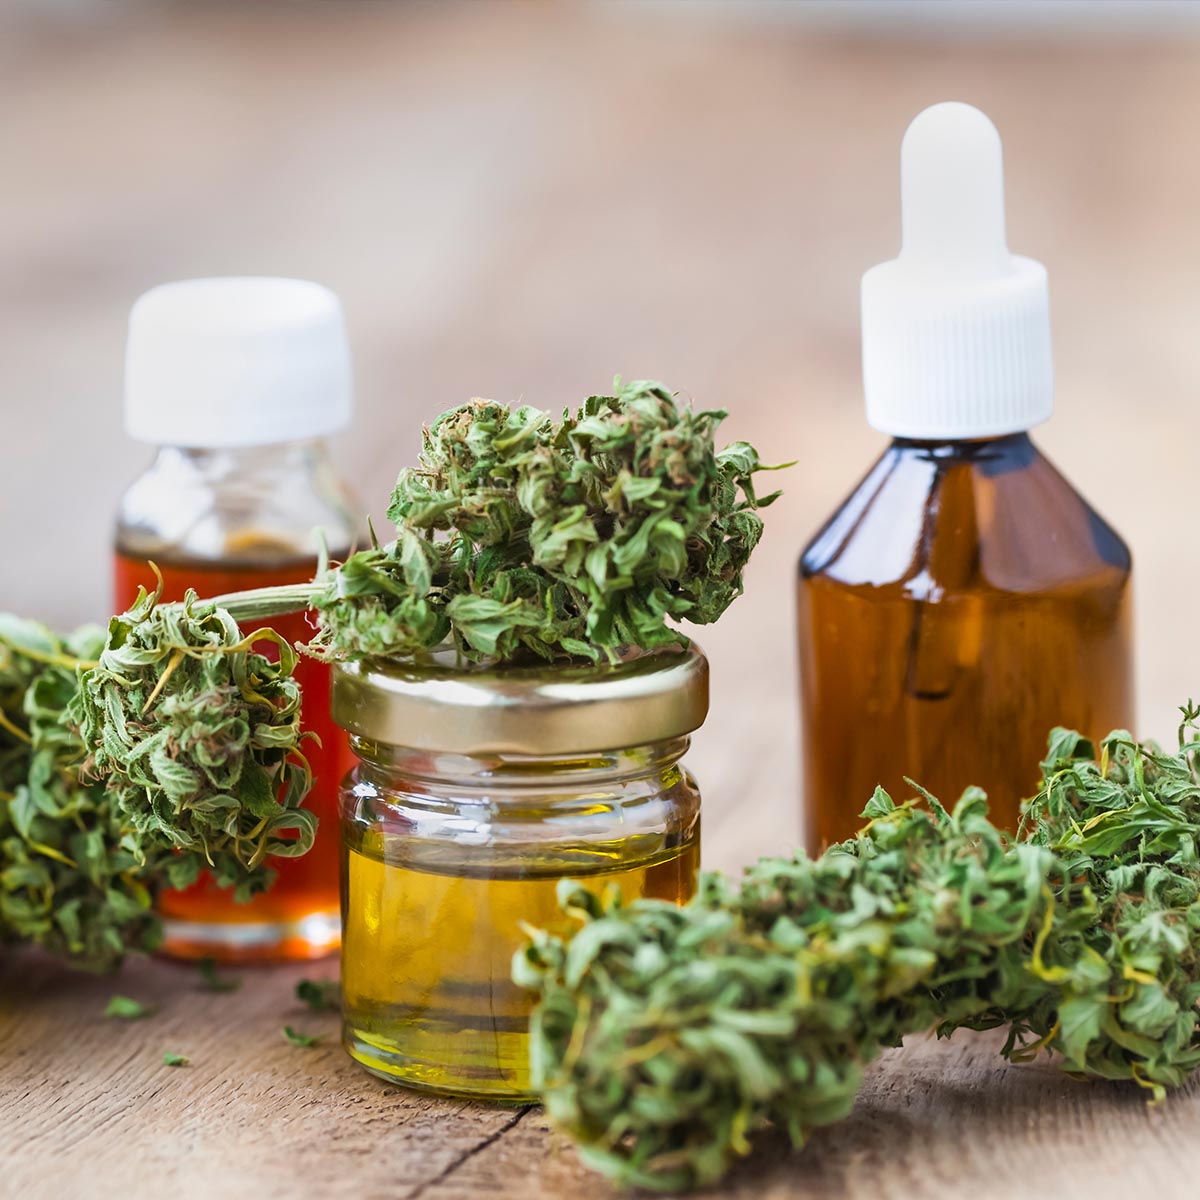 What You Should Know About Lab Testing and Quality Control of CBD Products In Denmark?